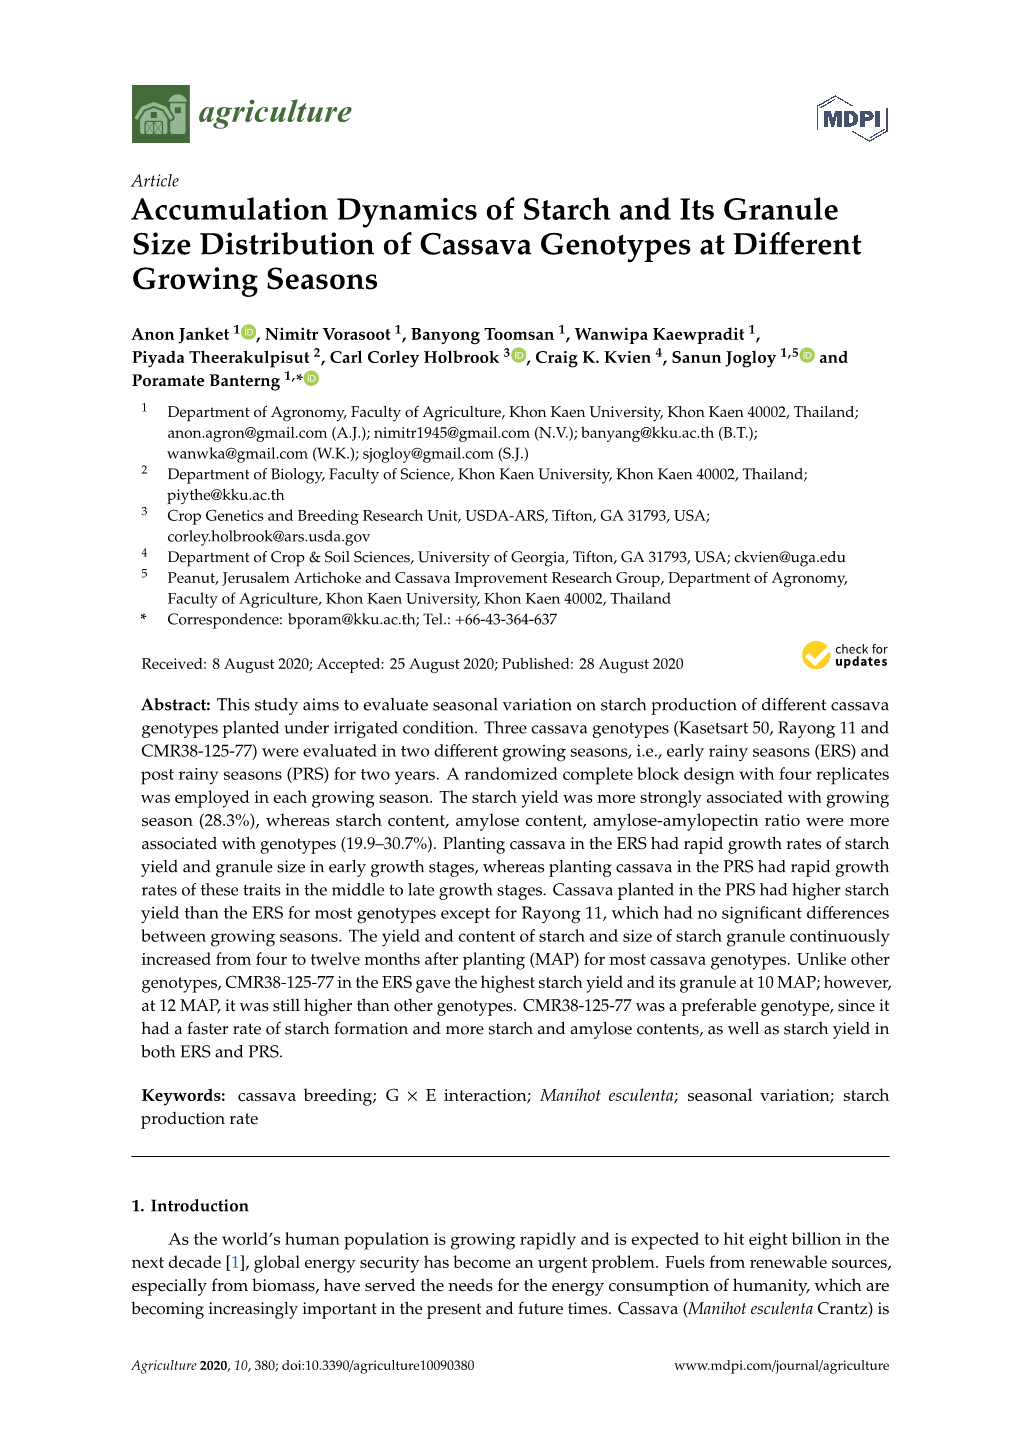 Accumulation Dynamics of Starch and Its Granule Size Distribution of Cassava Genotypes at Diﬀerent Growing Seasons